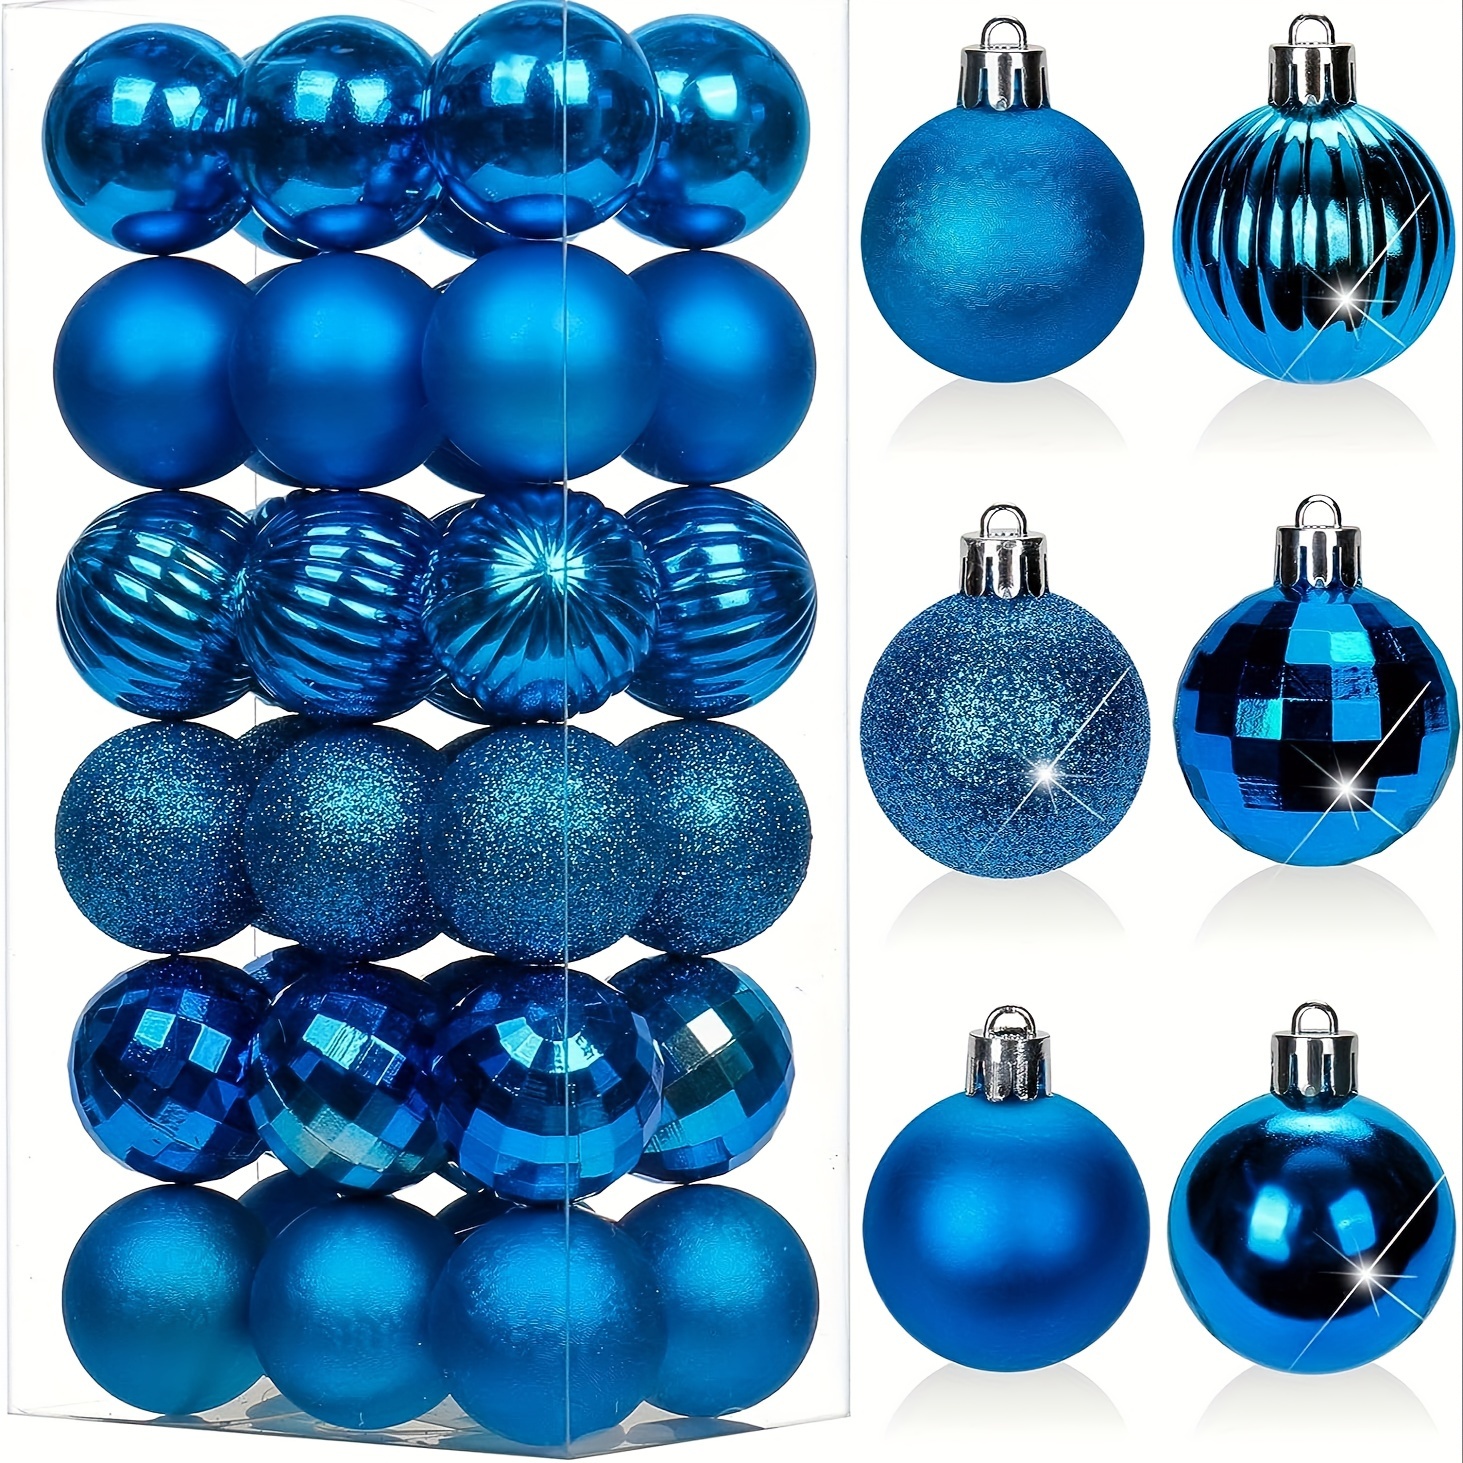 24 Pcs Christmas Balls Ornaments for Xmas Tree - Shatterproof Christmas Tree Decorations Small Hanging Ball 1.18 inch ,4 Style, Blue